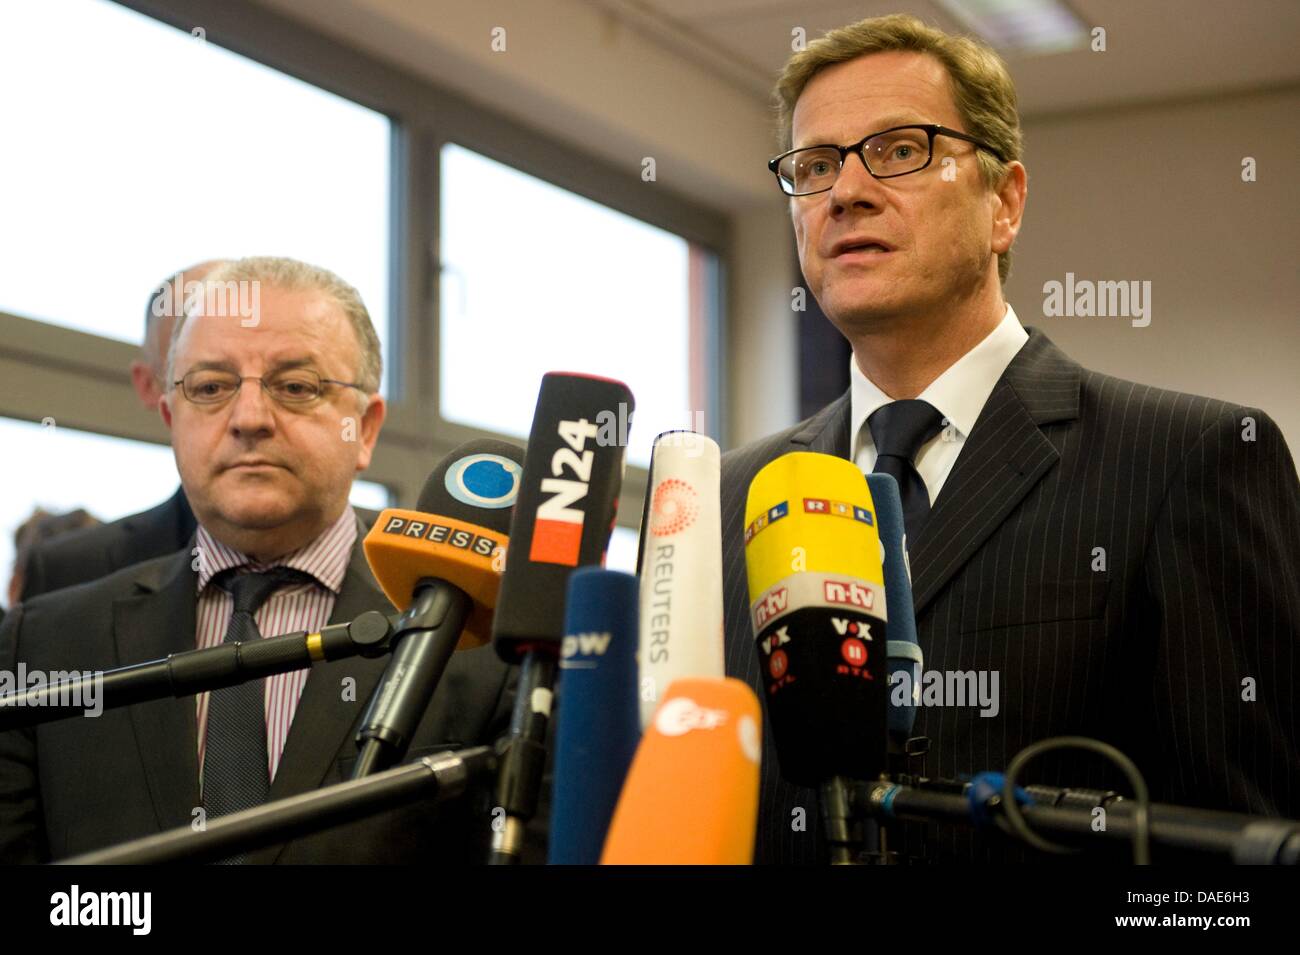 German Foreign Minister Guido Westerwelle and Kenan Kolat (L), Chairman of the Turkish Community in Germany, answer journalists' questions in the headquarters of the Turkish Community in Germany in Berlin, Germany, 15 November 2011. The reason for the visit is the newest information about the right-wing motivated murders of foreign fellow citizens. Photo: SEBASTIAN KAHNERT Stock Photo